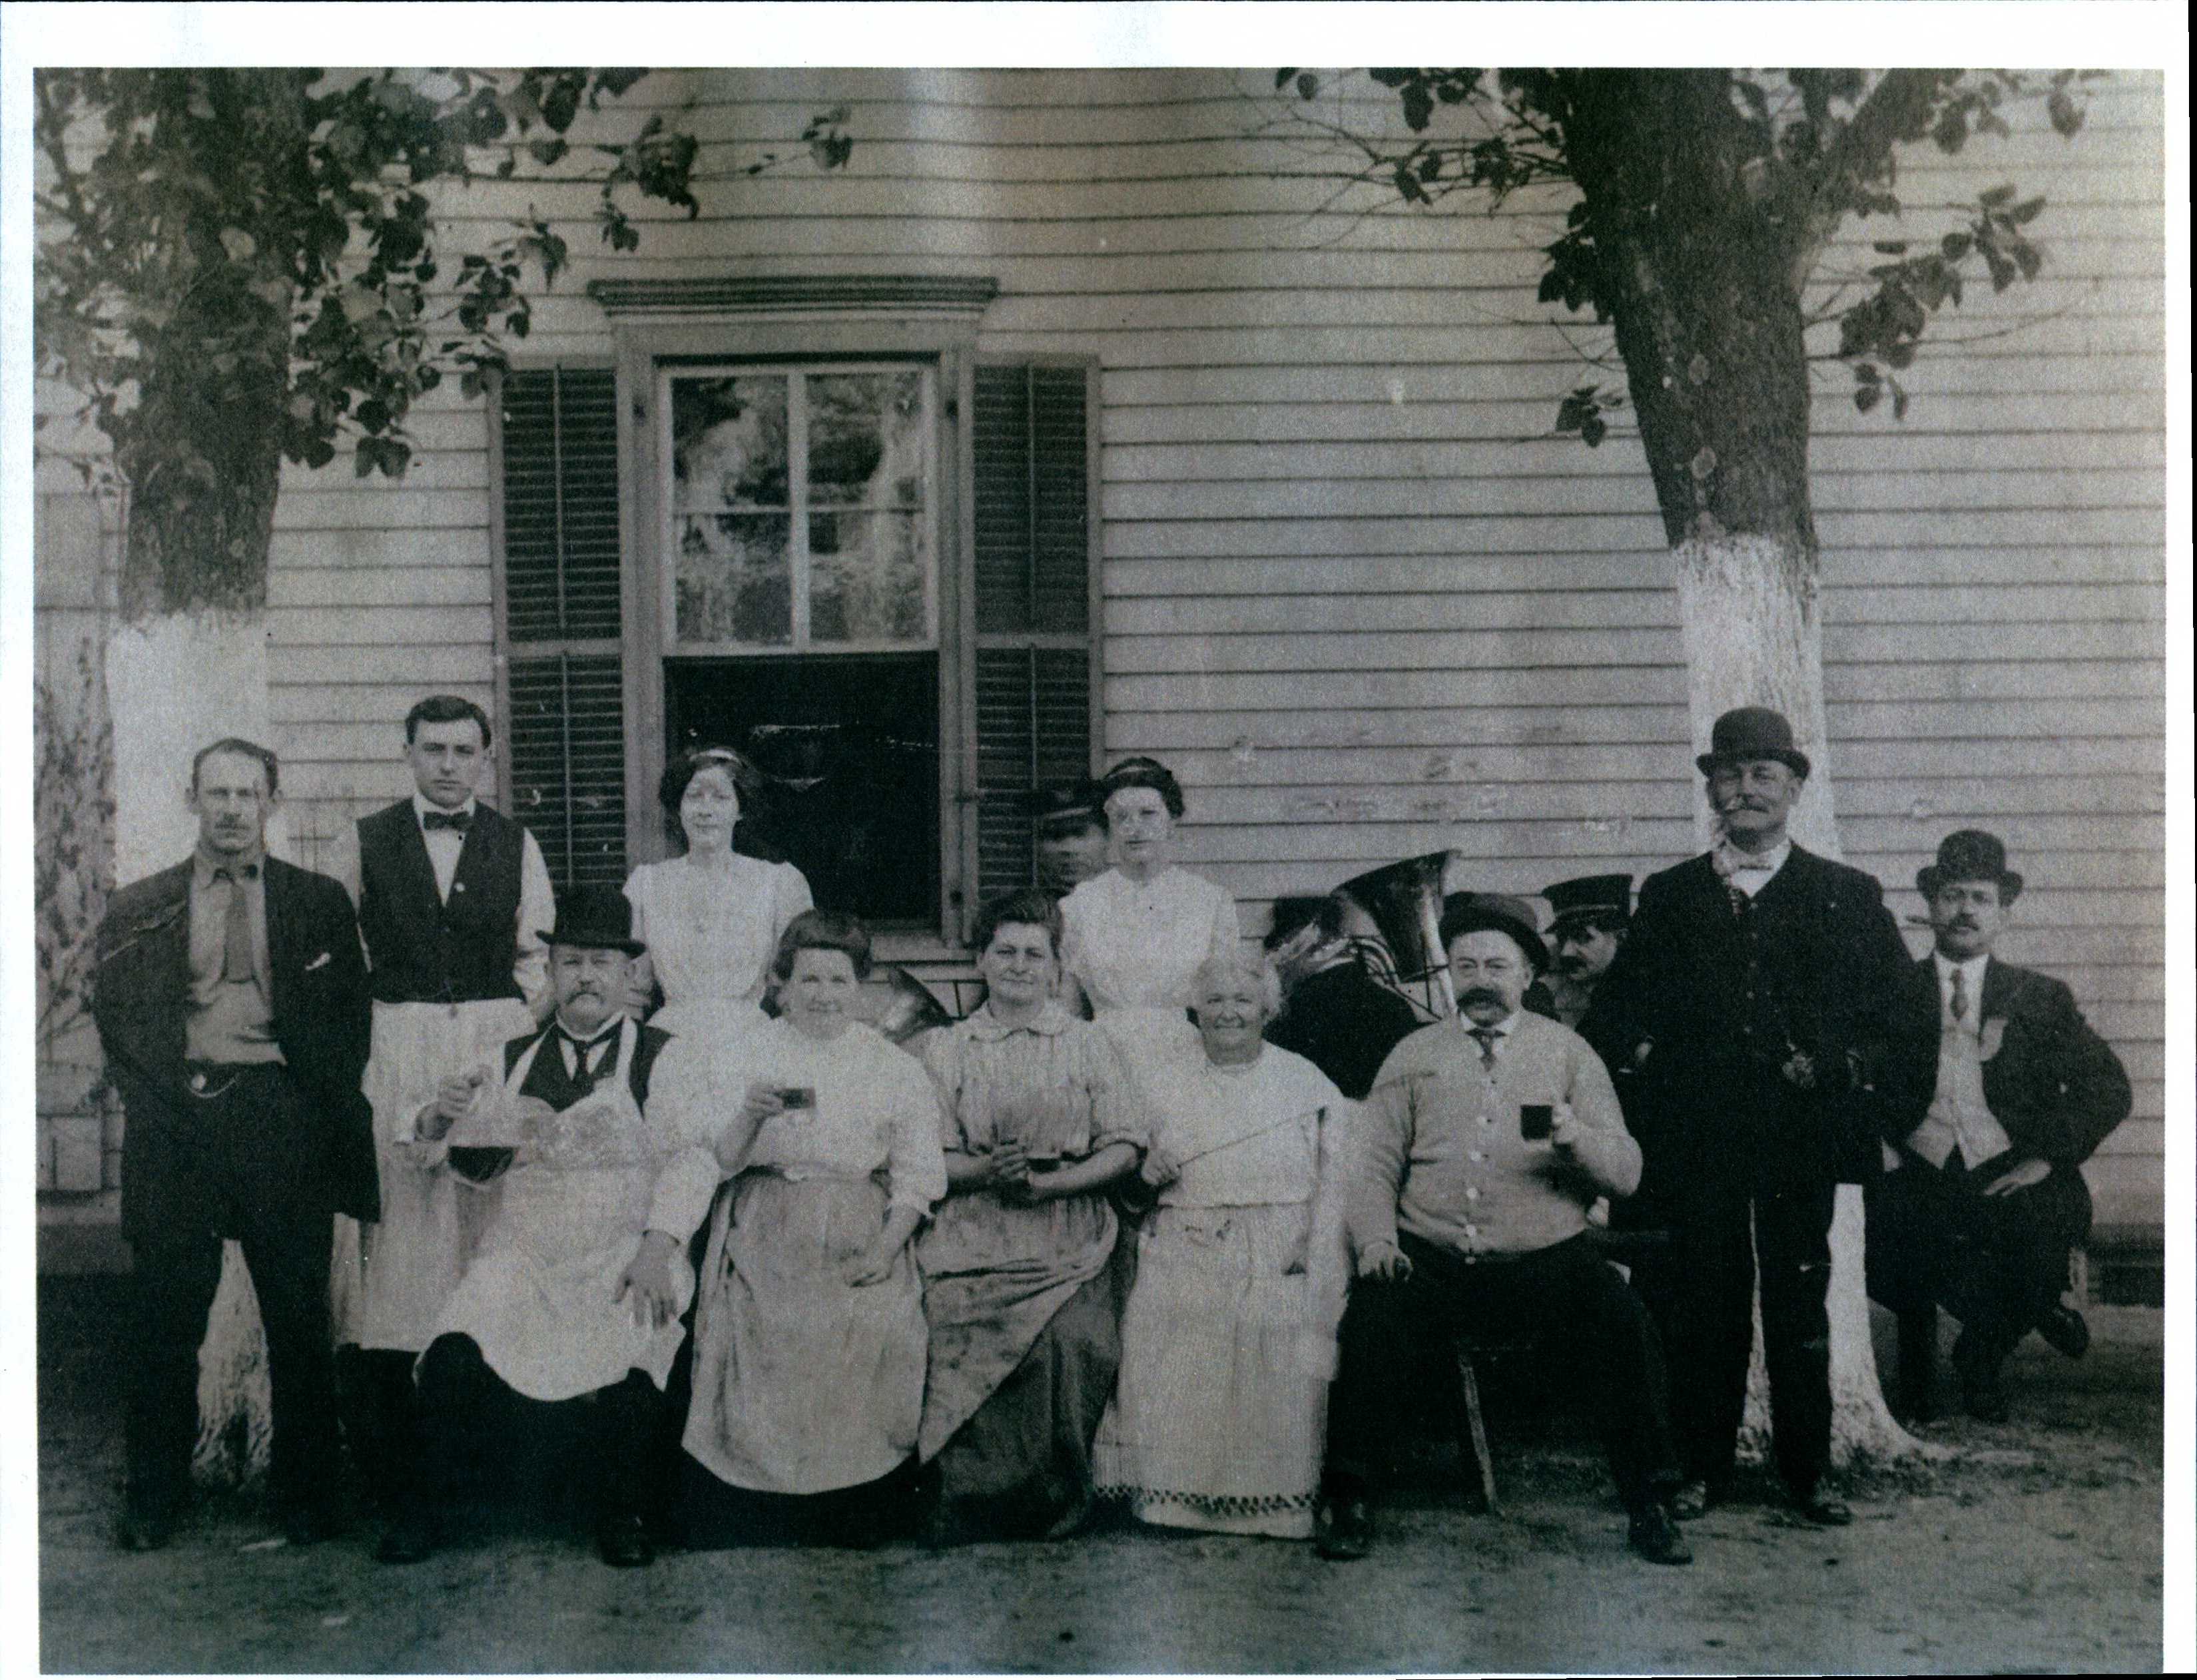 Black and white 19th century group photo. 